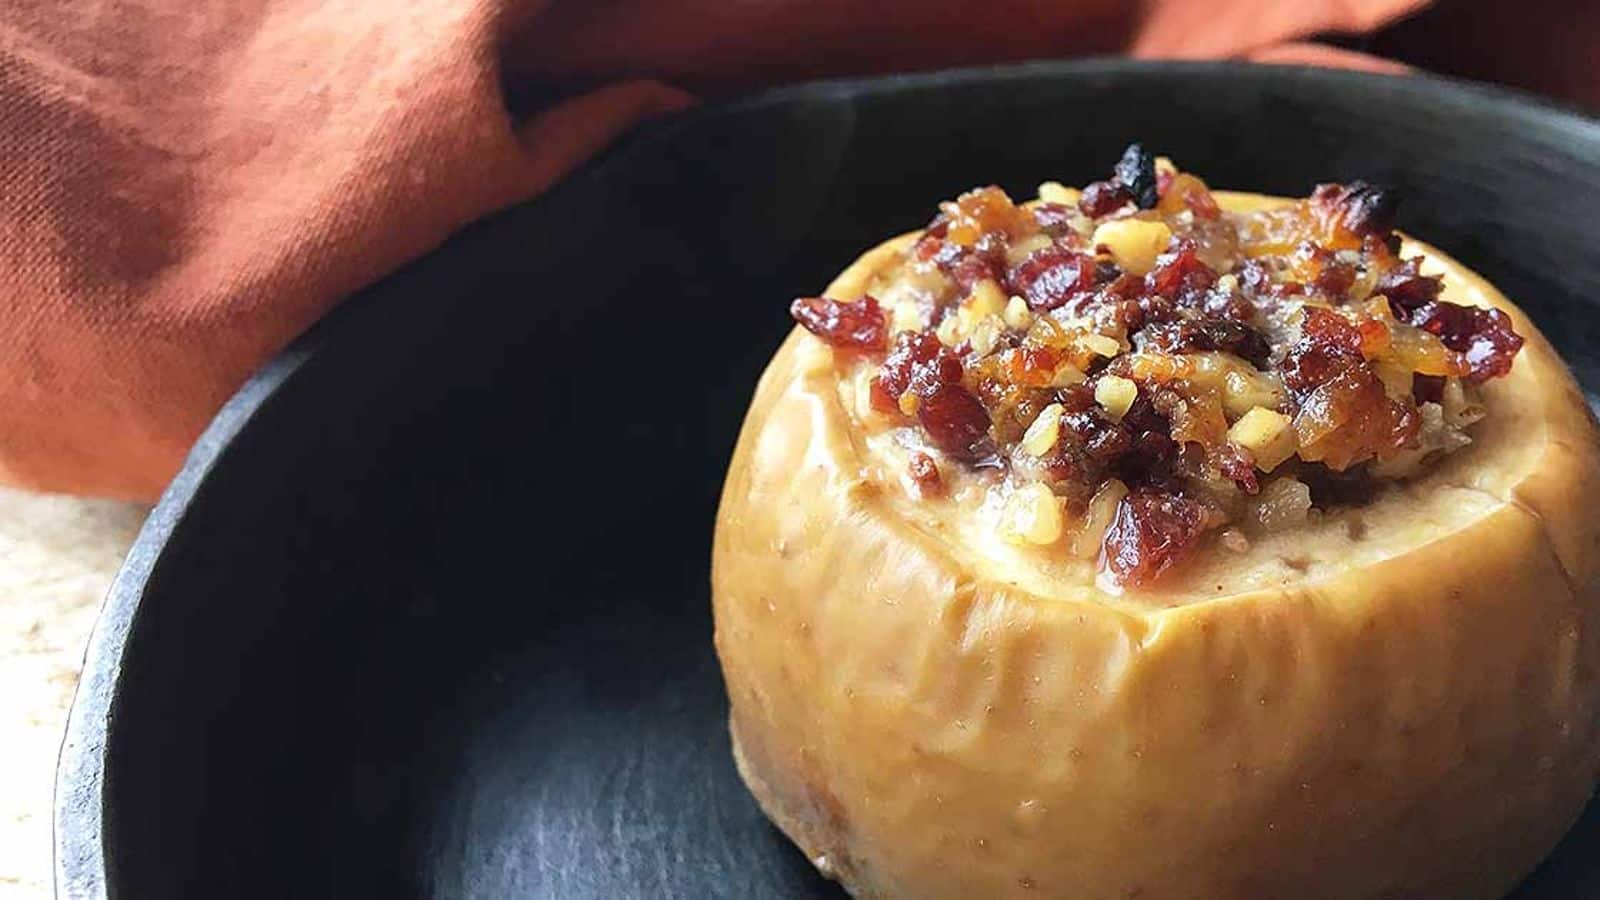 Turkey on your plate: Try this stuffed baked apples recipe